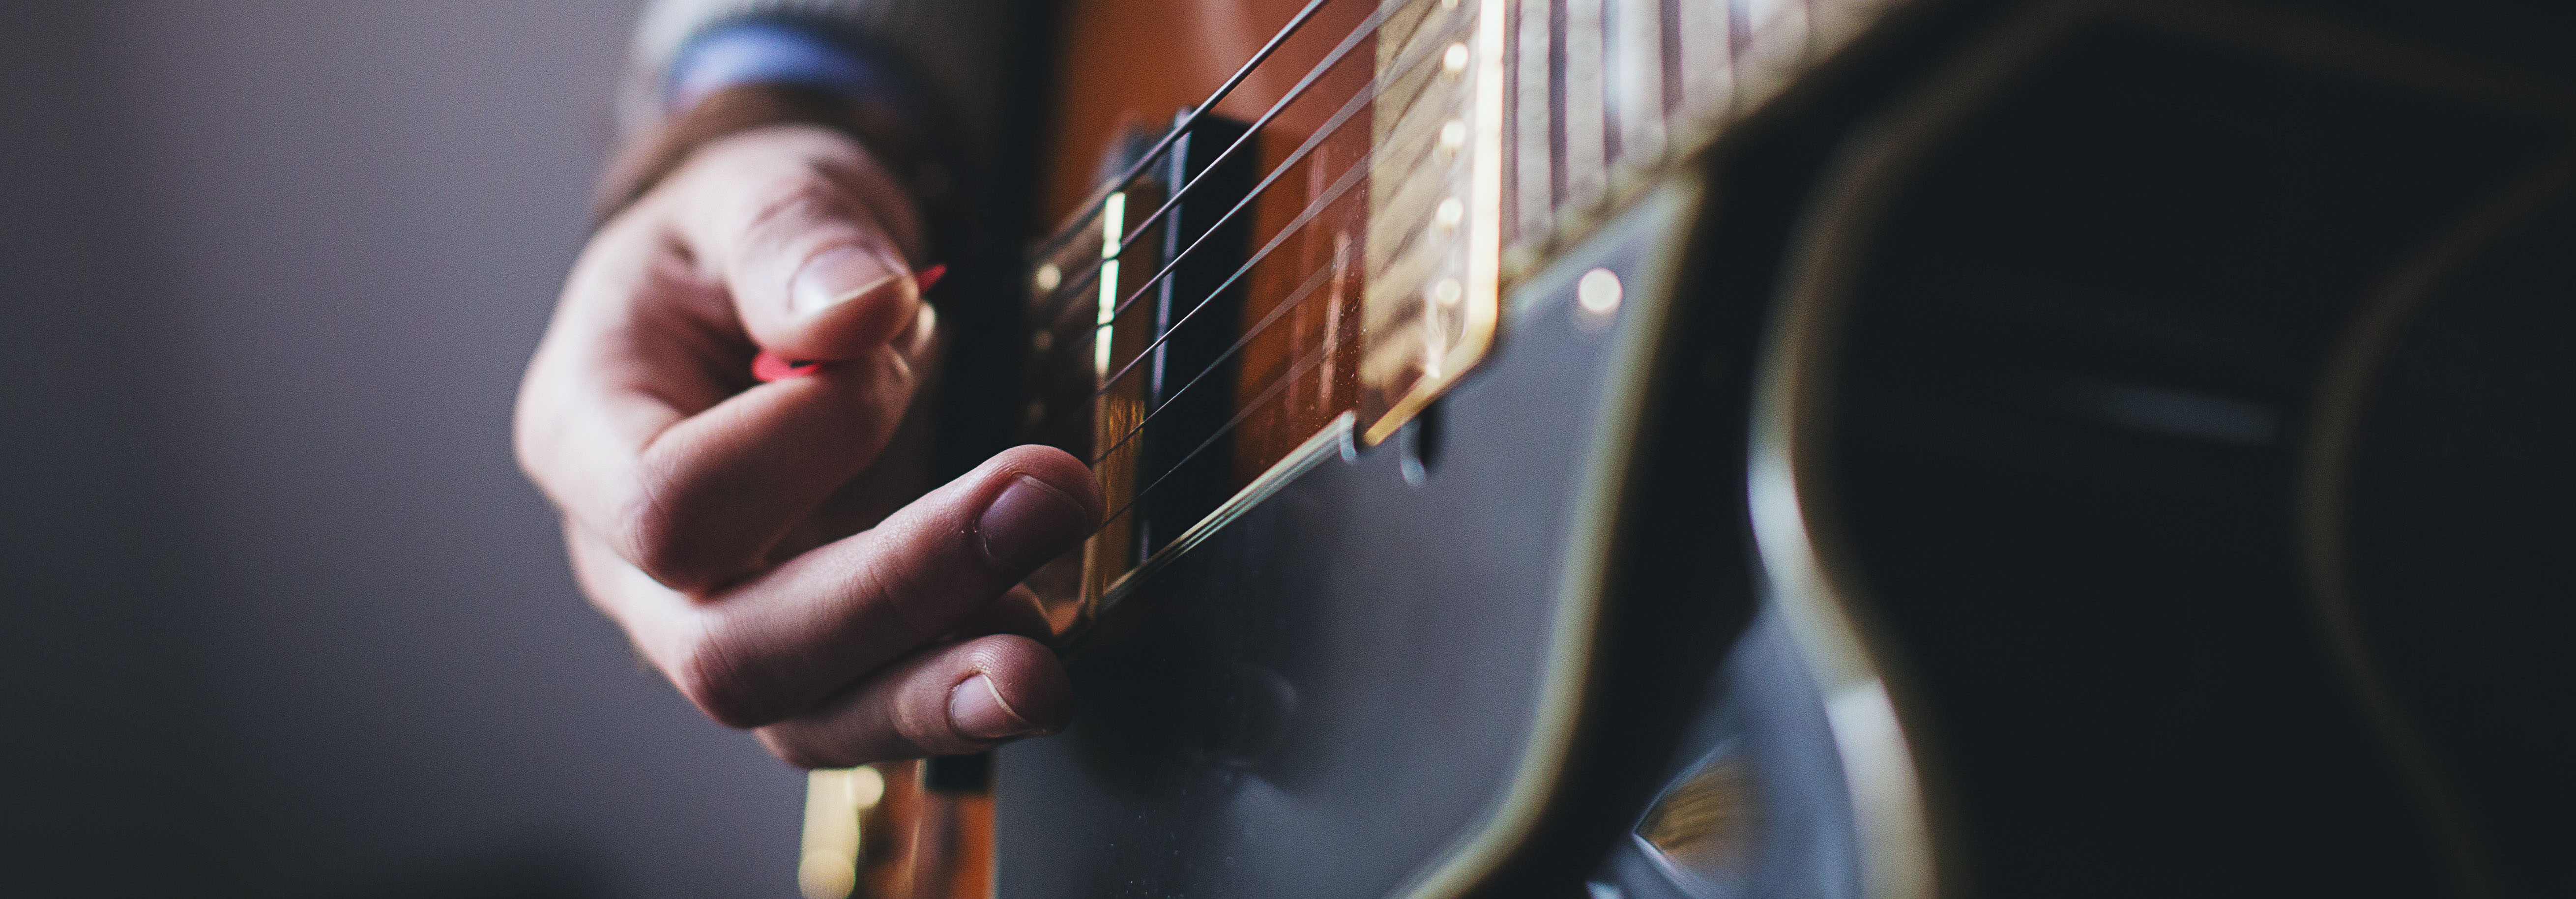 Someone playing the guitar, tightly focused on the fingers. If the instrument fits, play it. 